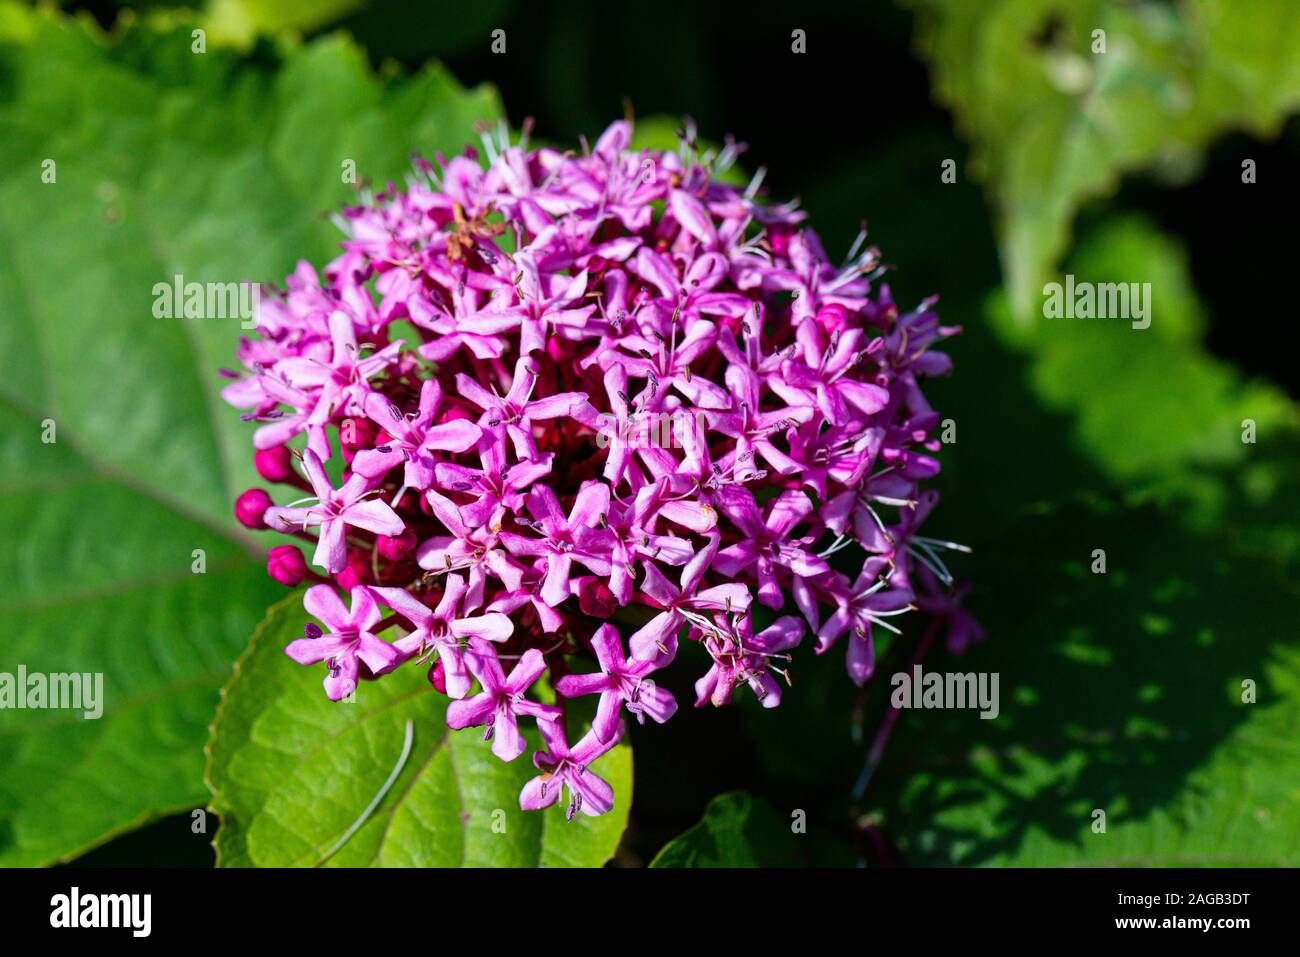 The pink flowers of a glory flower (Clerodendrum bungei) Stock Photo